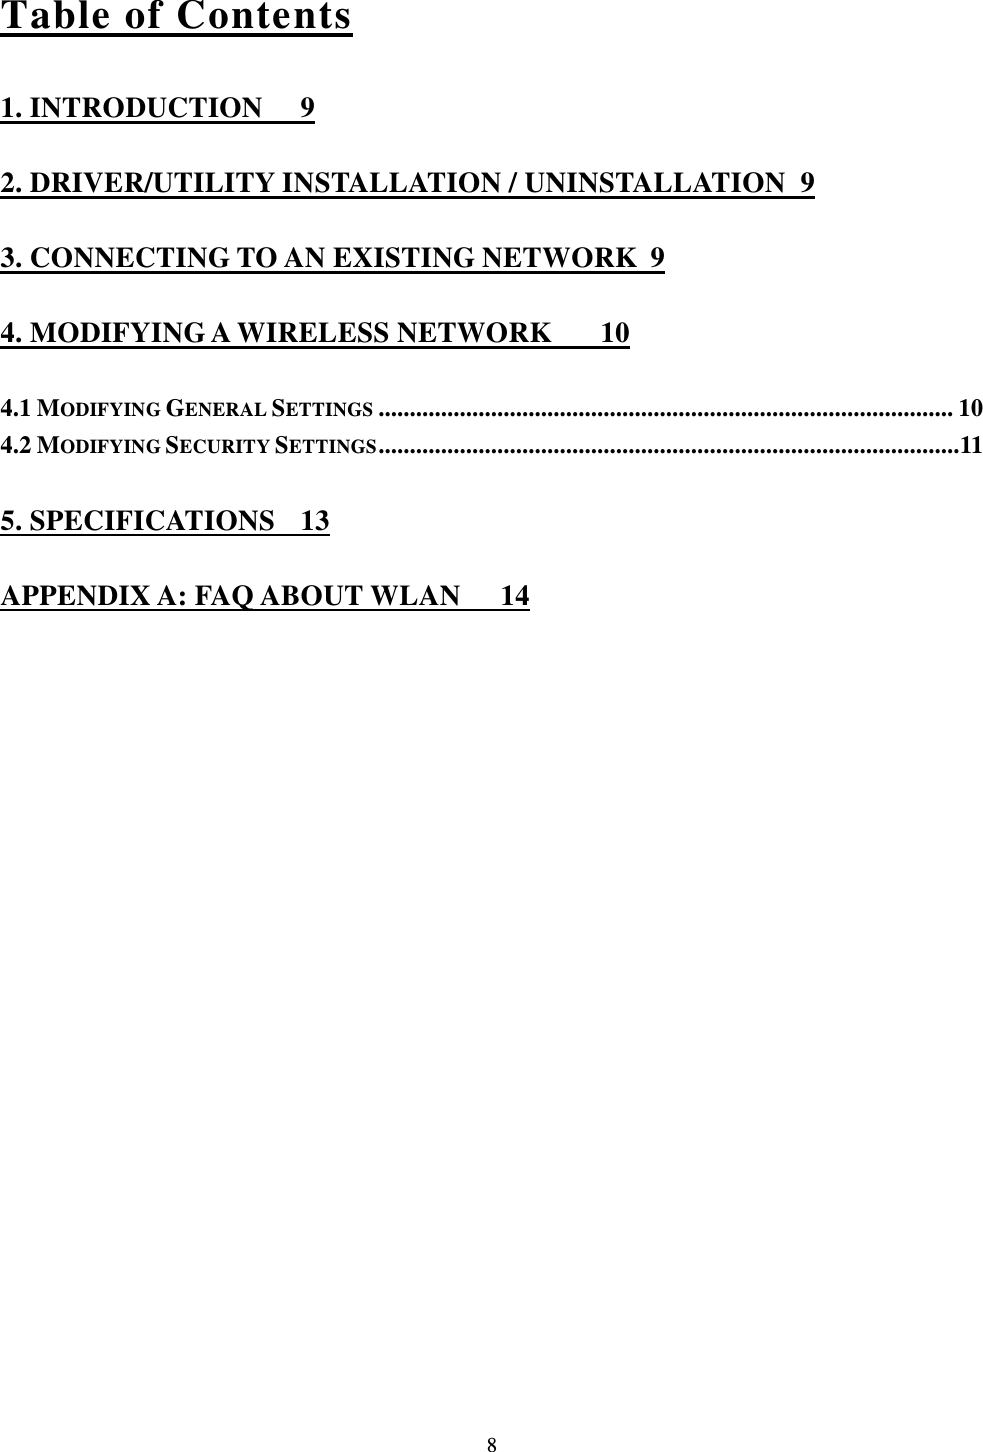  8 Table of Contents 1. INTRODUCTION  9 2. DRIVER/UTILITY INSTALLATION / UNINSTALLATION  9 3. CONNECTING TO AN EXISTING NETWORK  9 4. MODIFYING A WIRELESS NETWORK  10 4.1 MODIFYING GENERAL SETTINGS ............................................................................................ 10 4.2 MODIFYING SECURITY SETTINGS ............................................................................................. 11 5. SPECIFICATIONS  13 APPENDIX A: FAQ ABOUT WLAN  14 